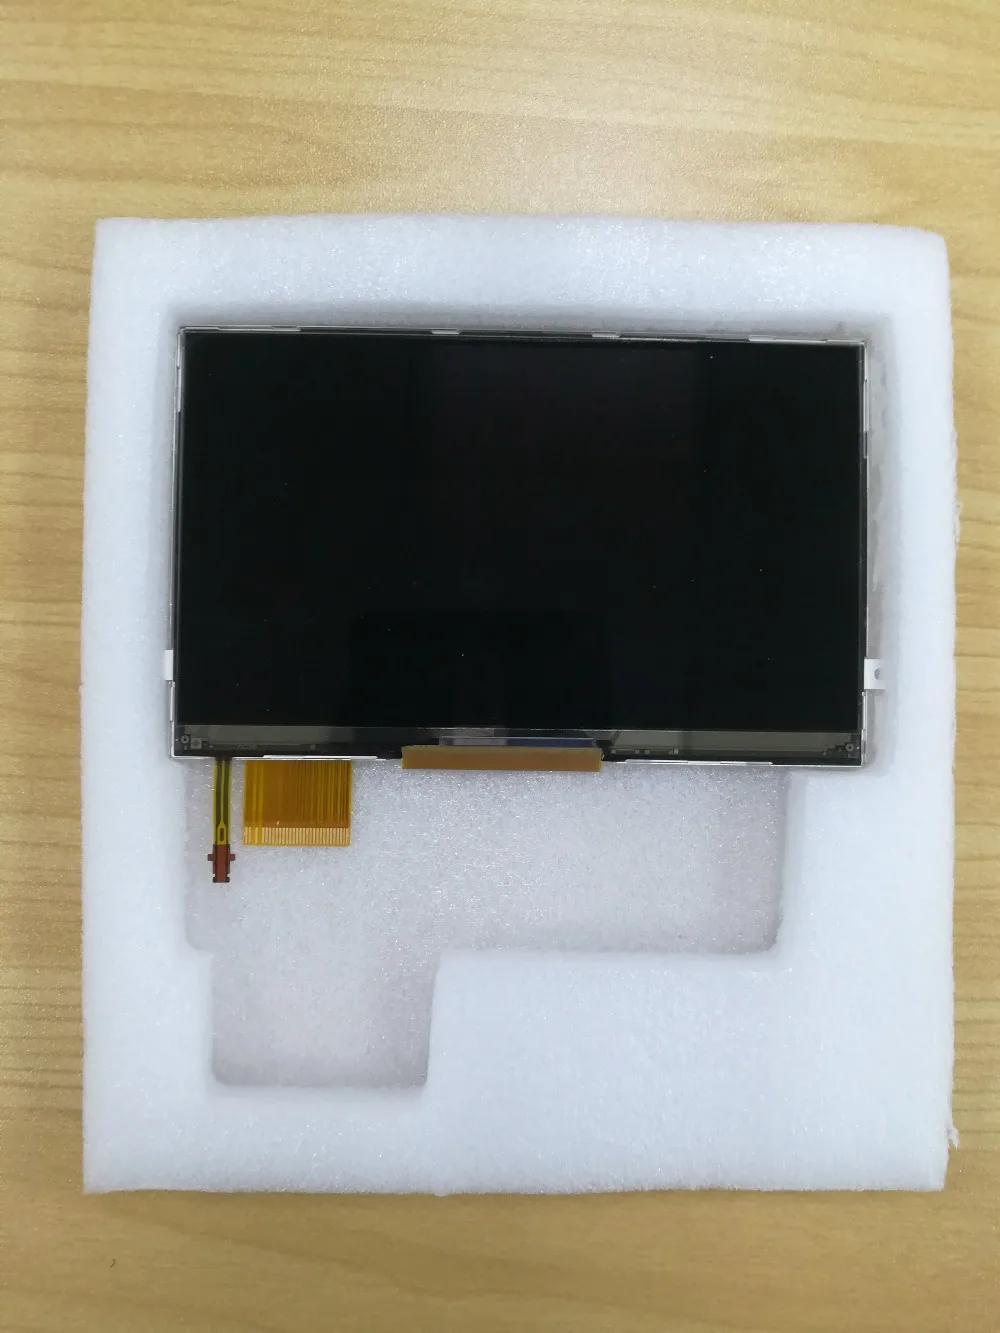 LCD Display Screen Replacement for Sony PSP 3000 Repair Part UO 